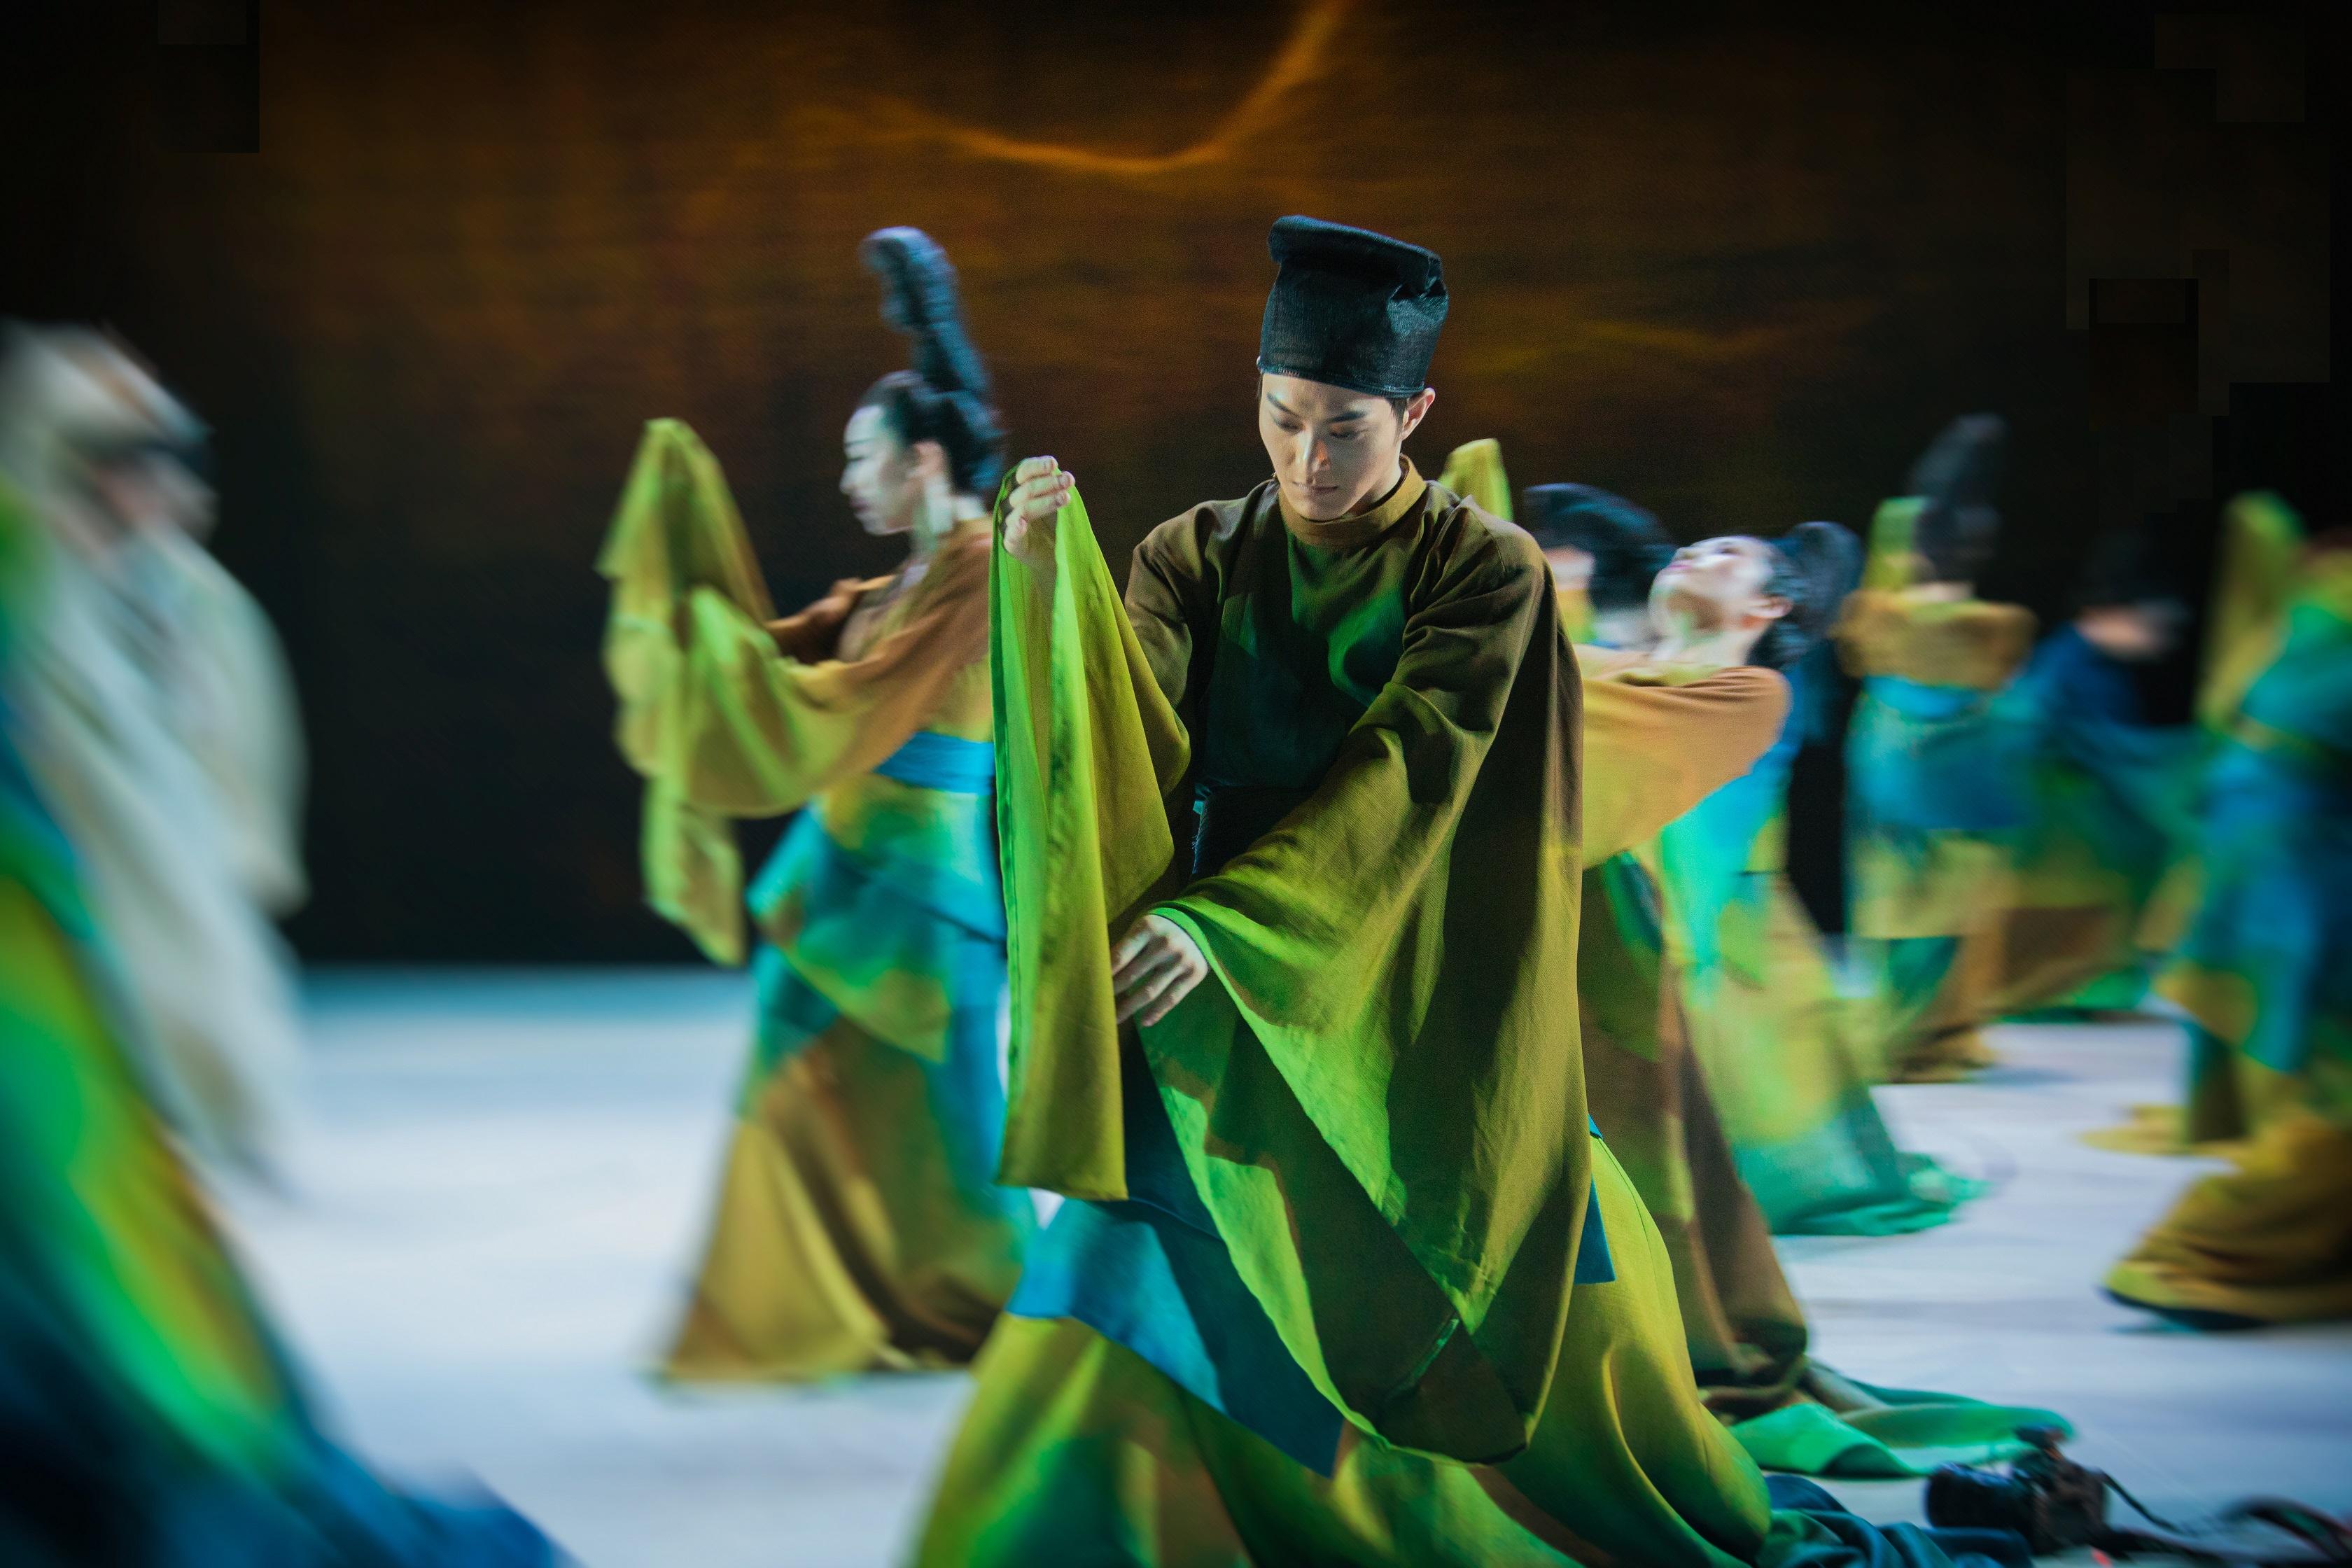 The Leisure and Cultural Services Department will present the dance drama "Poetic Dance: The Journey of a Legendary Landscape Painting" by China Oriental Performing Arts Group in January next year. Photo shows "Poetic Dance: The Journey of a Legendary Landscape Painting".